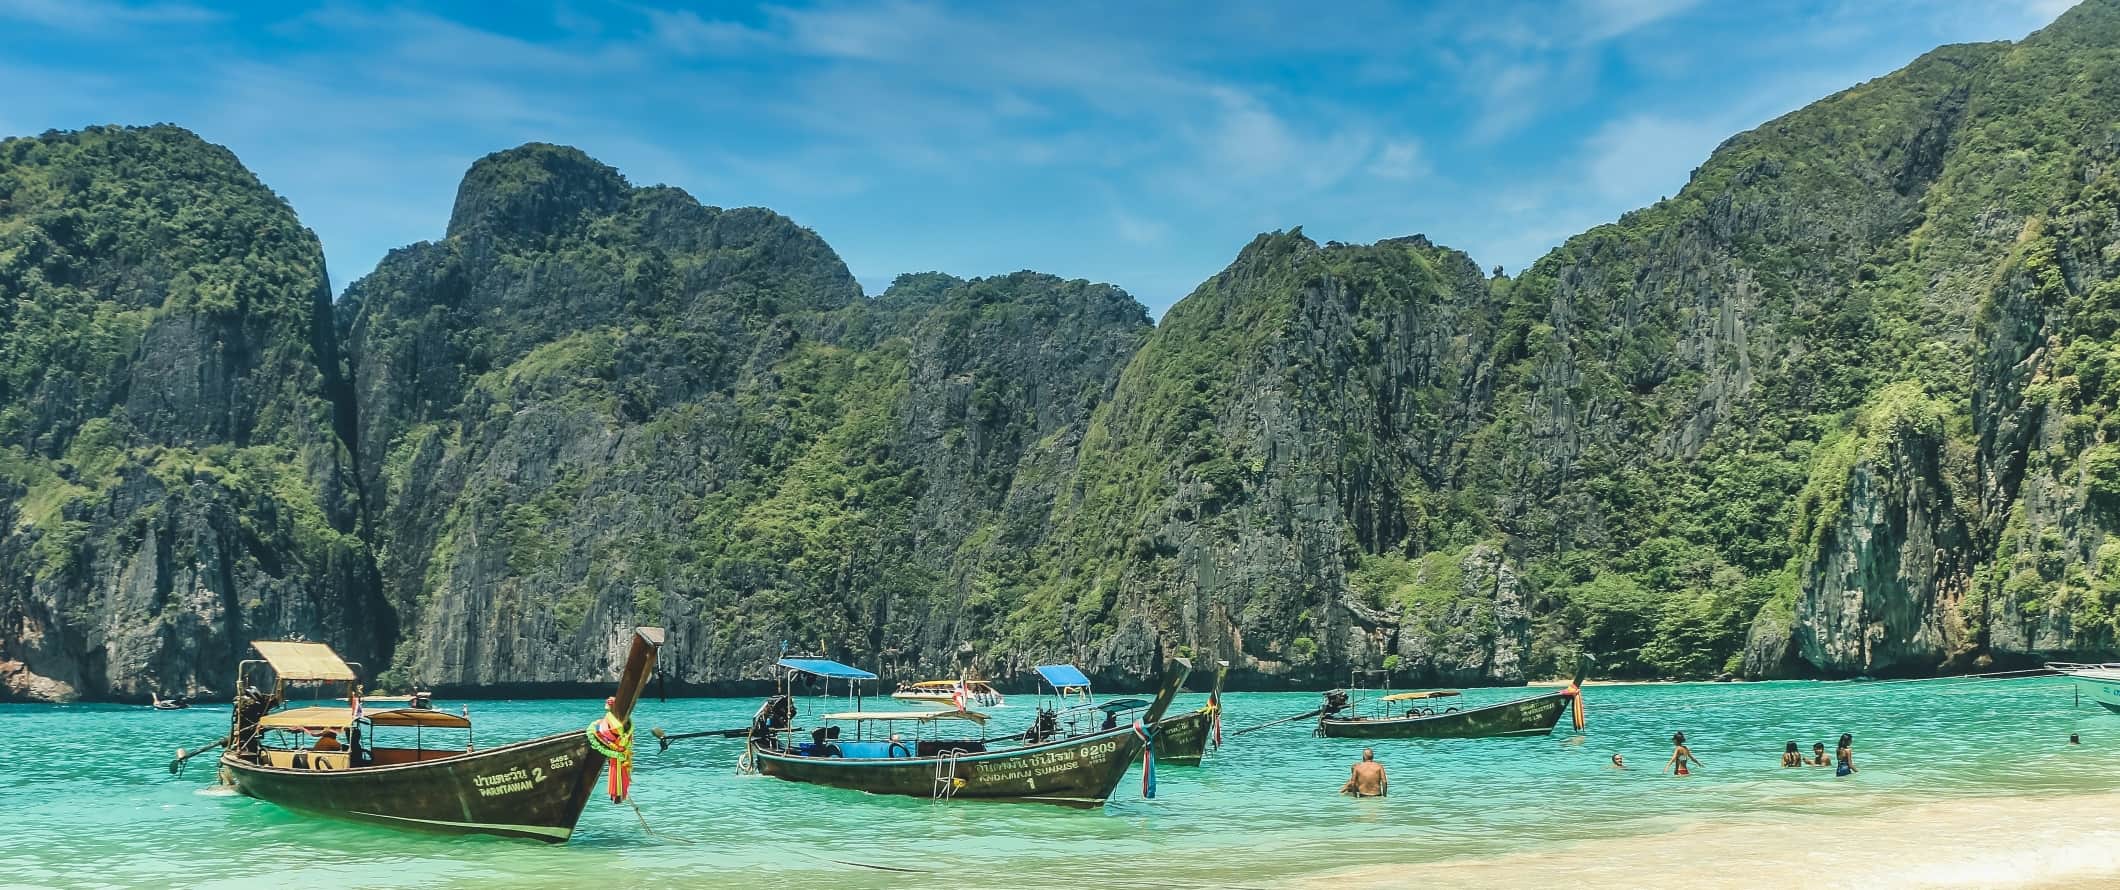 Longtail boats pulled up on the beach on the island of Ko Phi Phi, Thailand